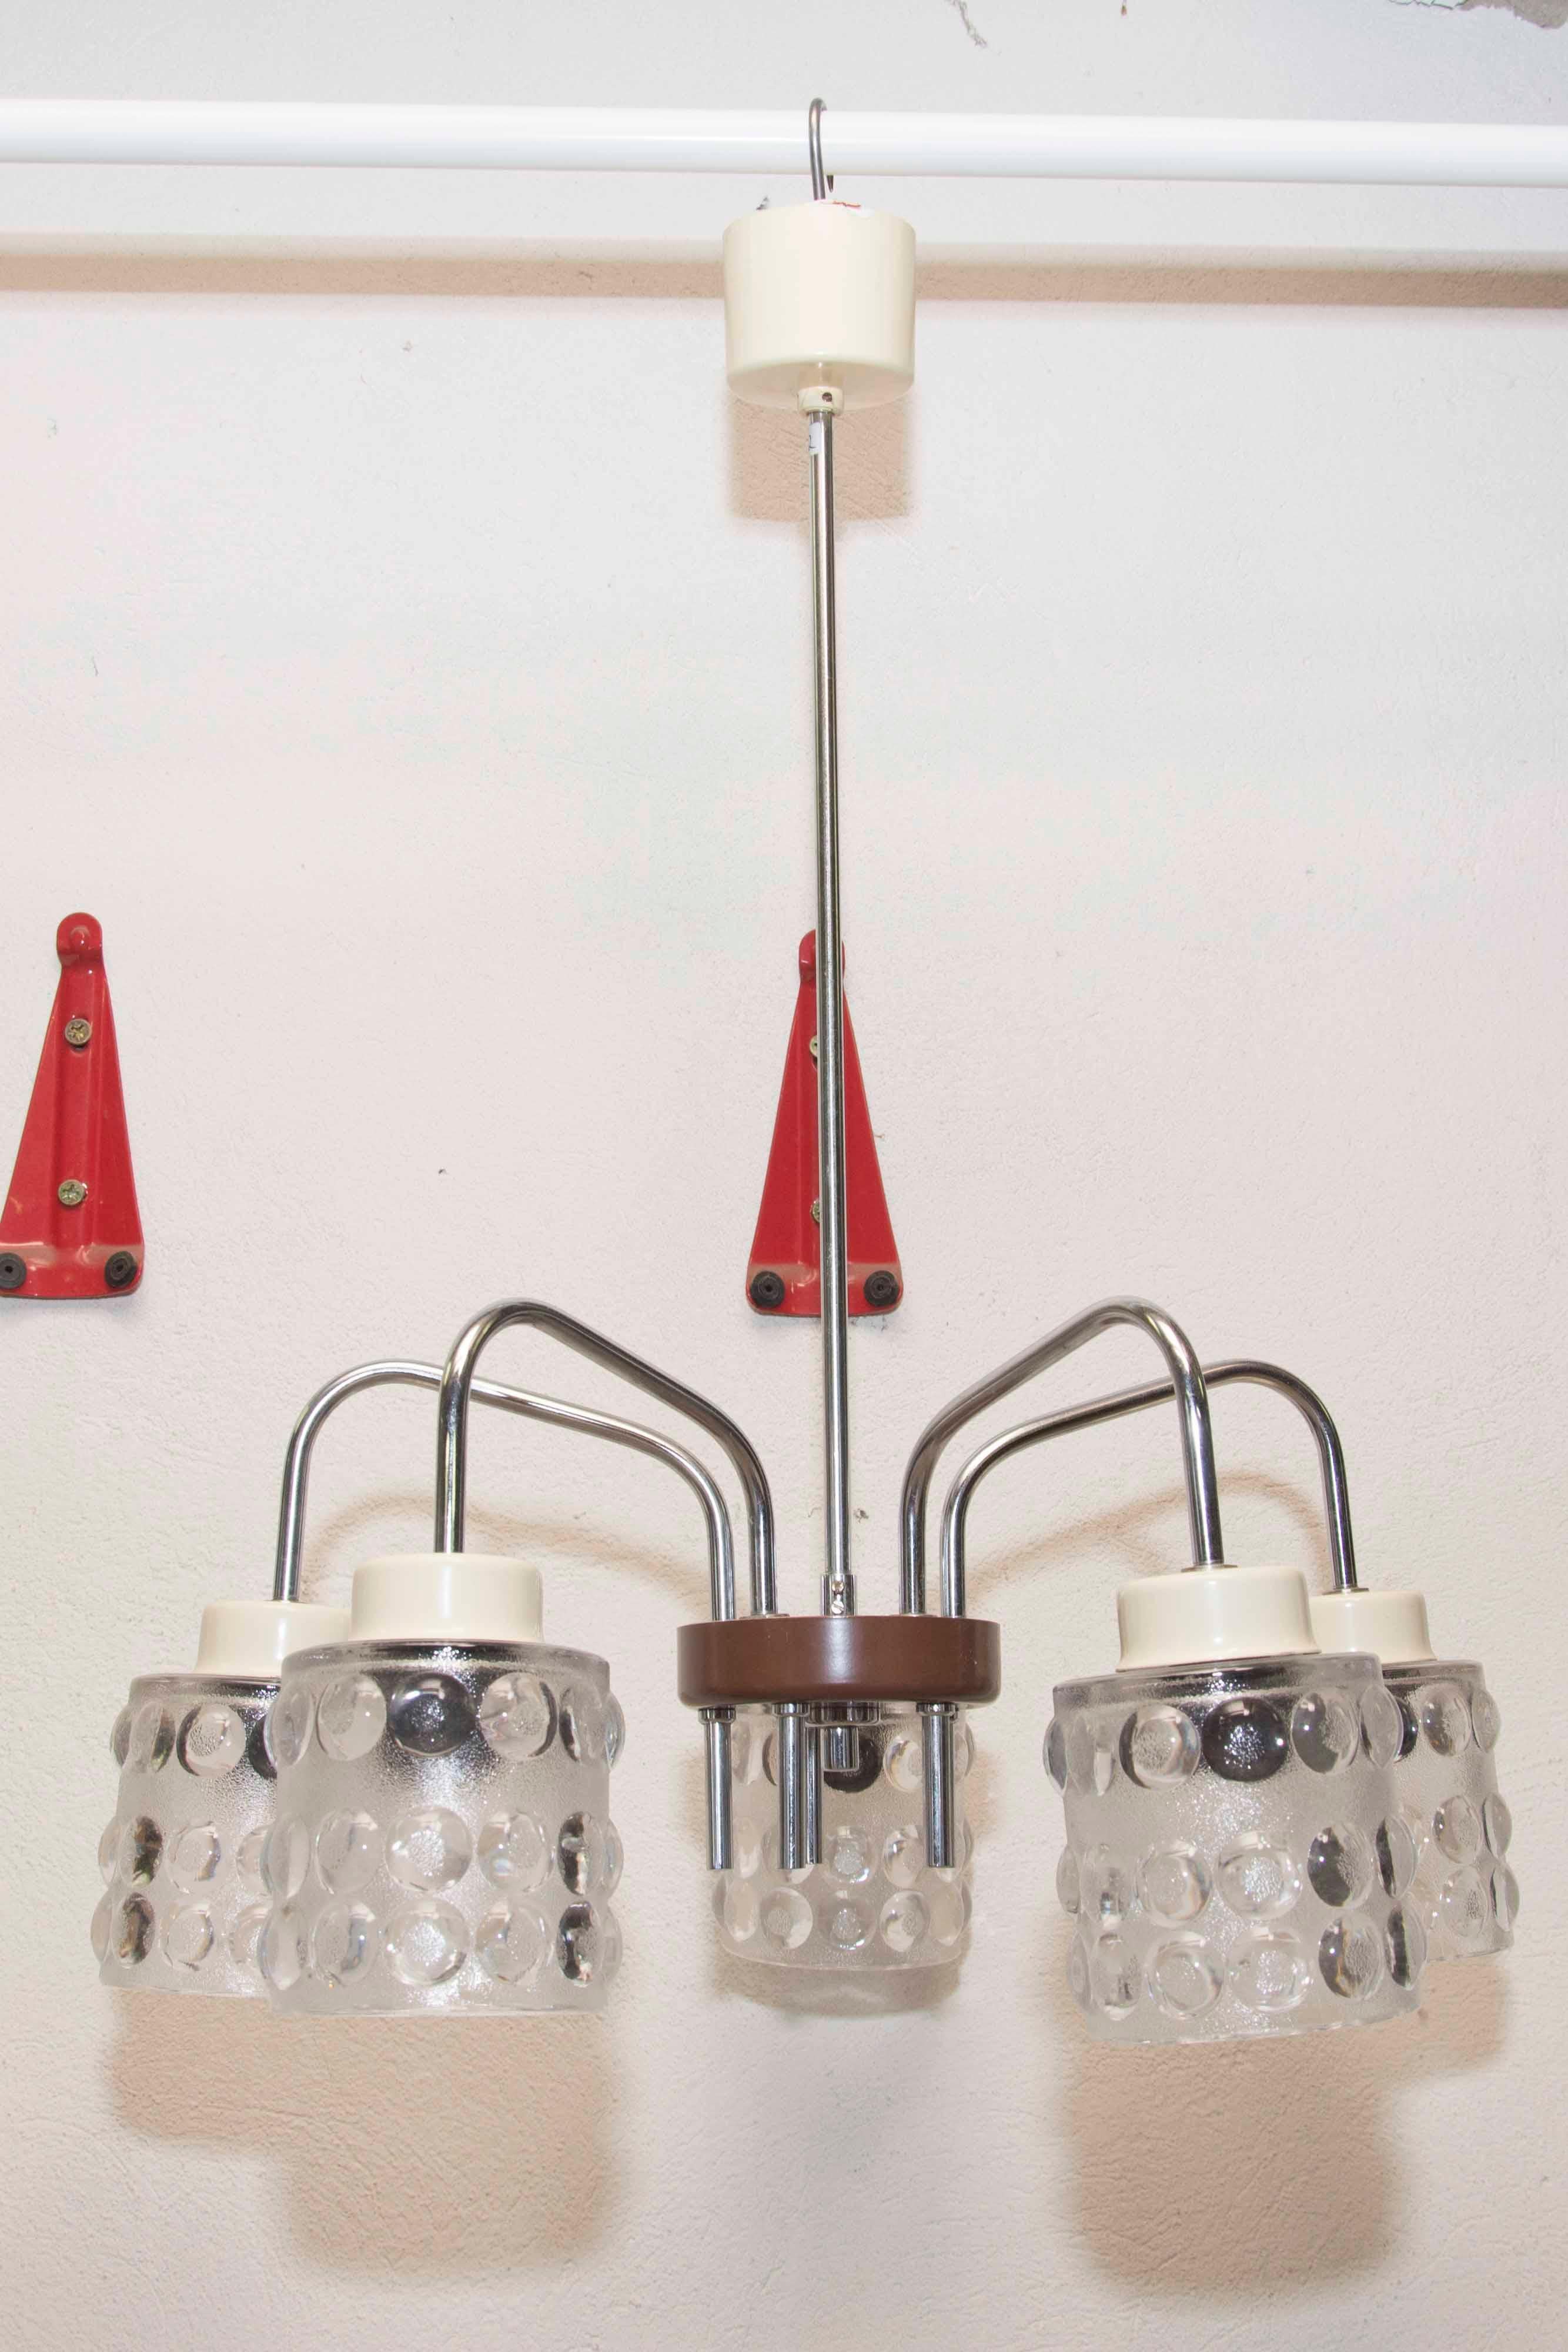 Mid-Century Modern Midcentury Pendant with Five Cut-Glass Lampshades, Lidokov, 1960s For Sale